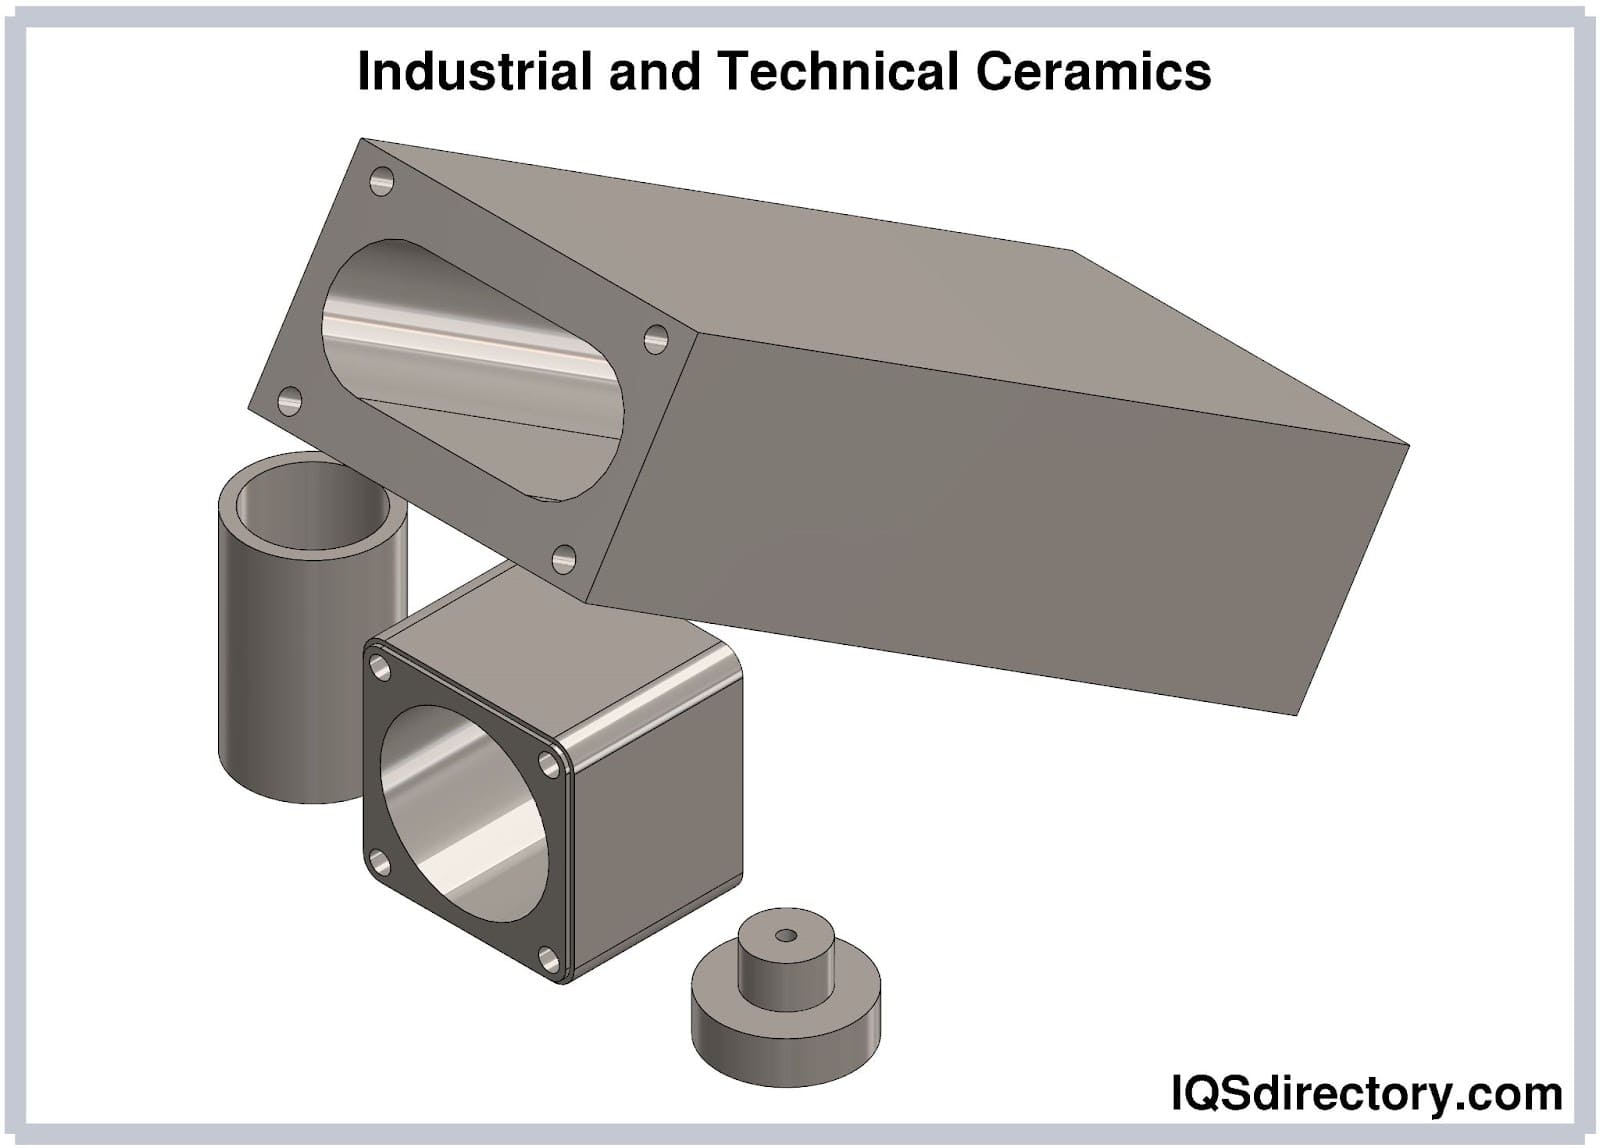 Industrial and Technical Ceramics